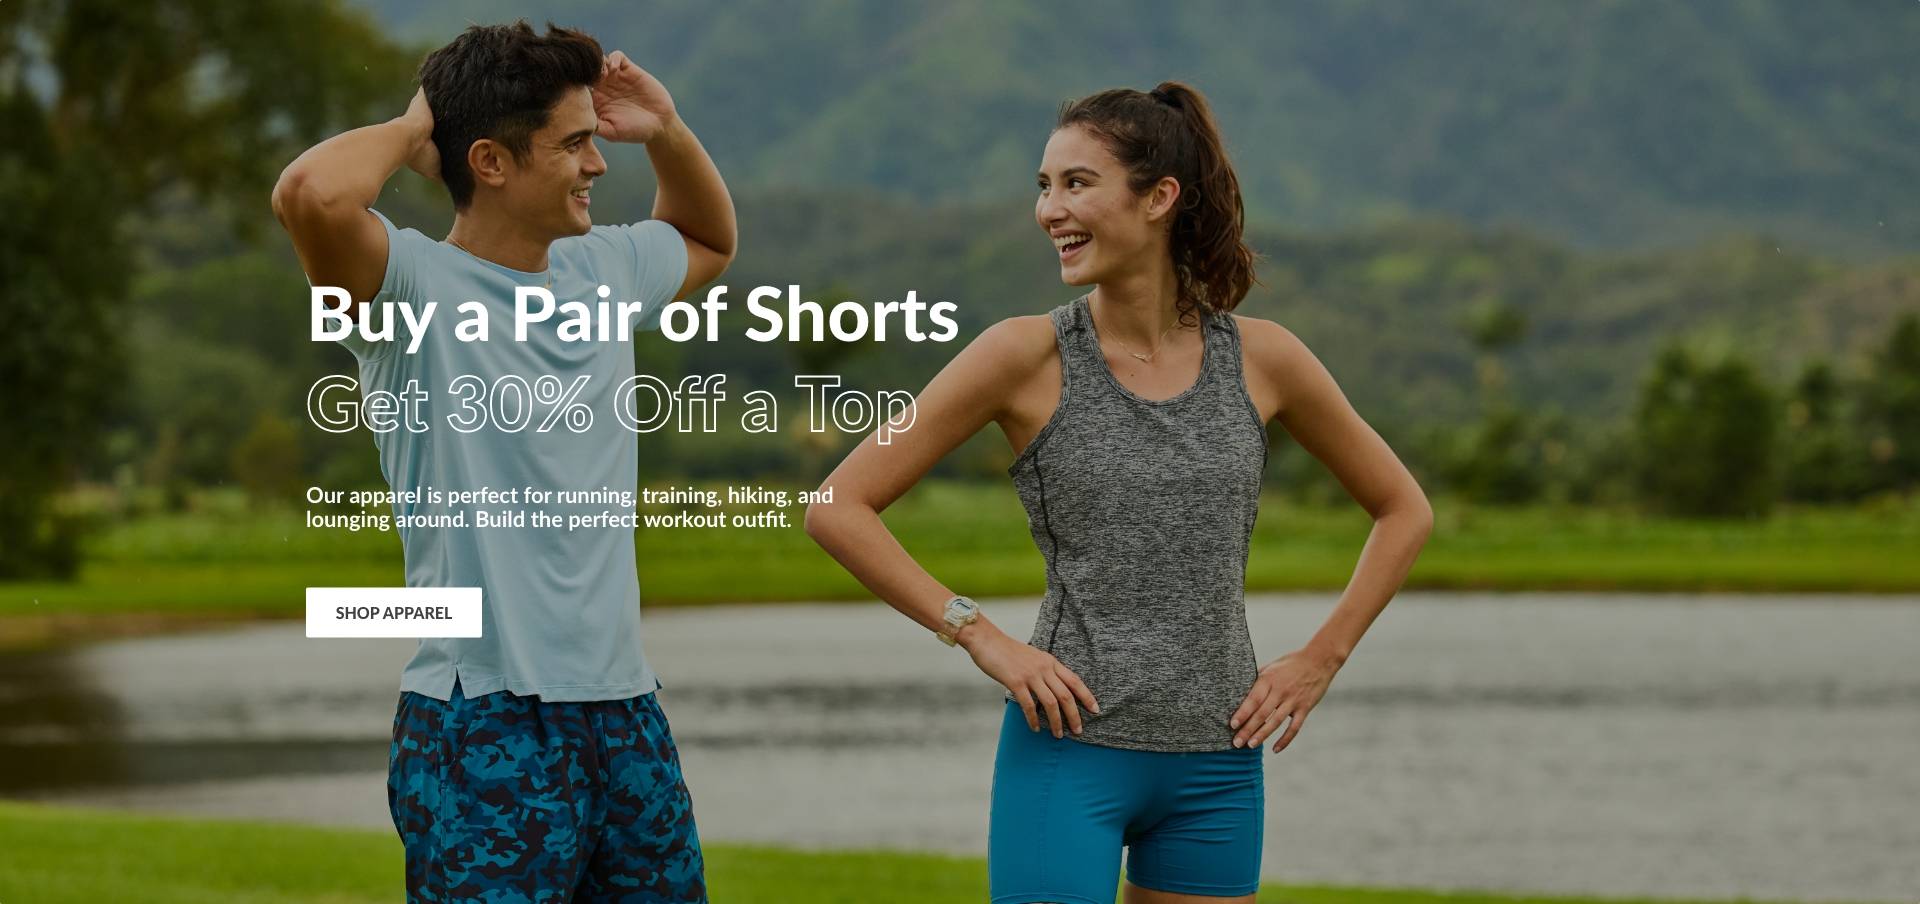 Buy a Pair of Shorts, Get 30% off a Top. Our apparel is perfect for running, training, hiking, and lounging around. Build the perfect workout outfit. SHOP APPAREL